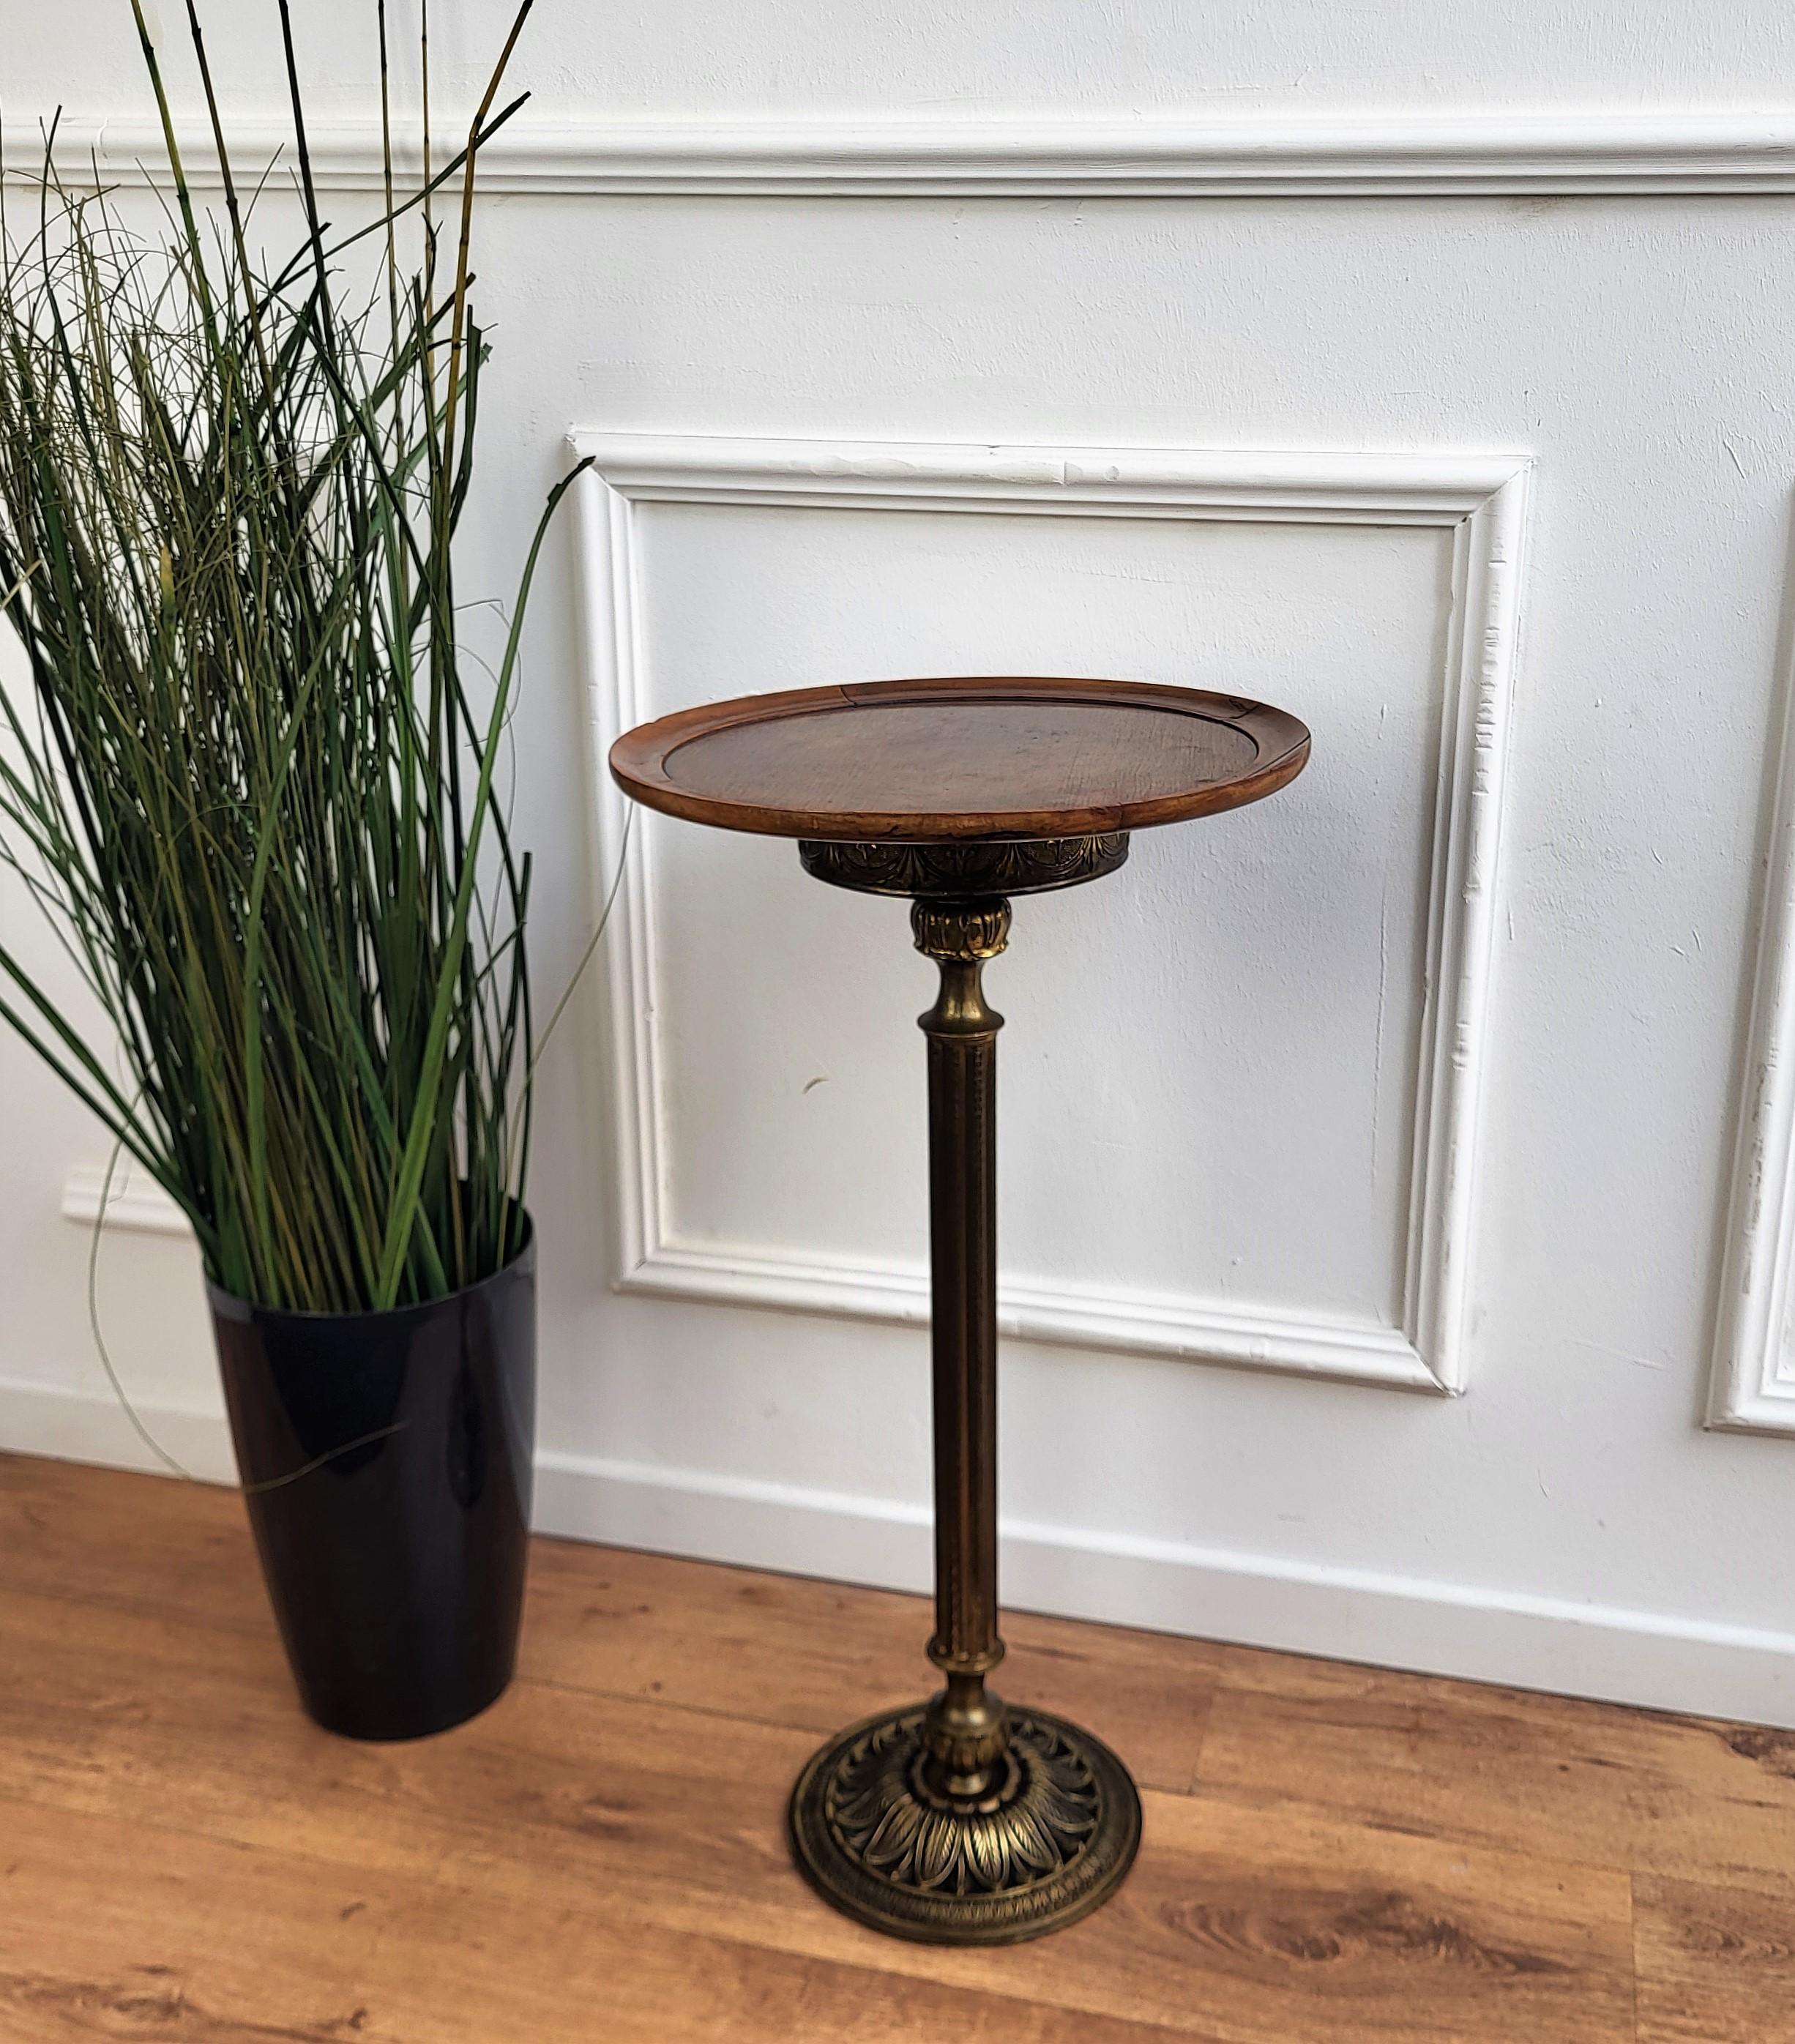 Beautiful and stylish vintage 1980s Italian brass side table or pedestal table stand. Very good condition with great brass metal part fully decorated with classical motifs and roud wooden top.
 